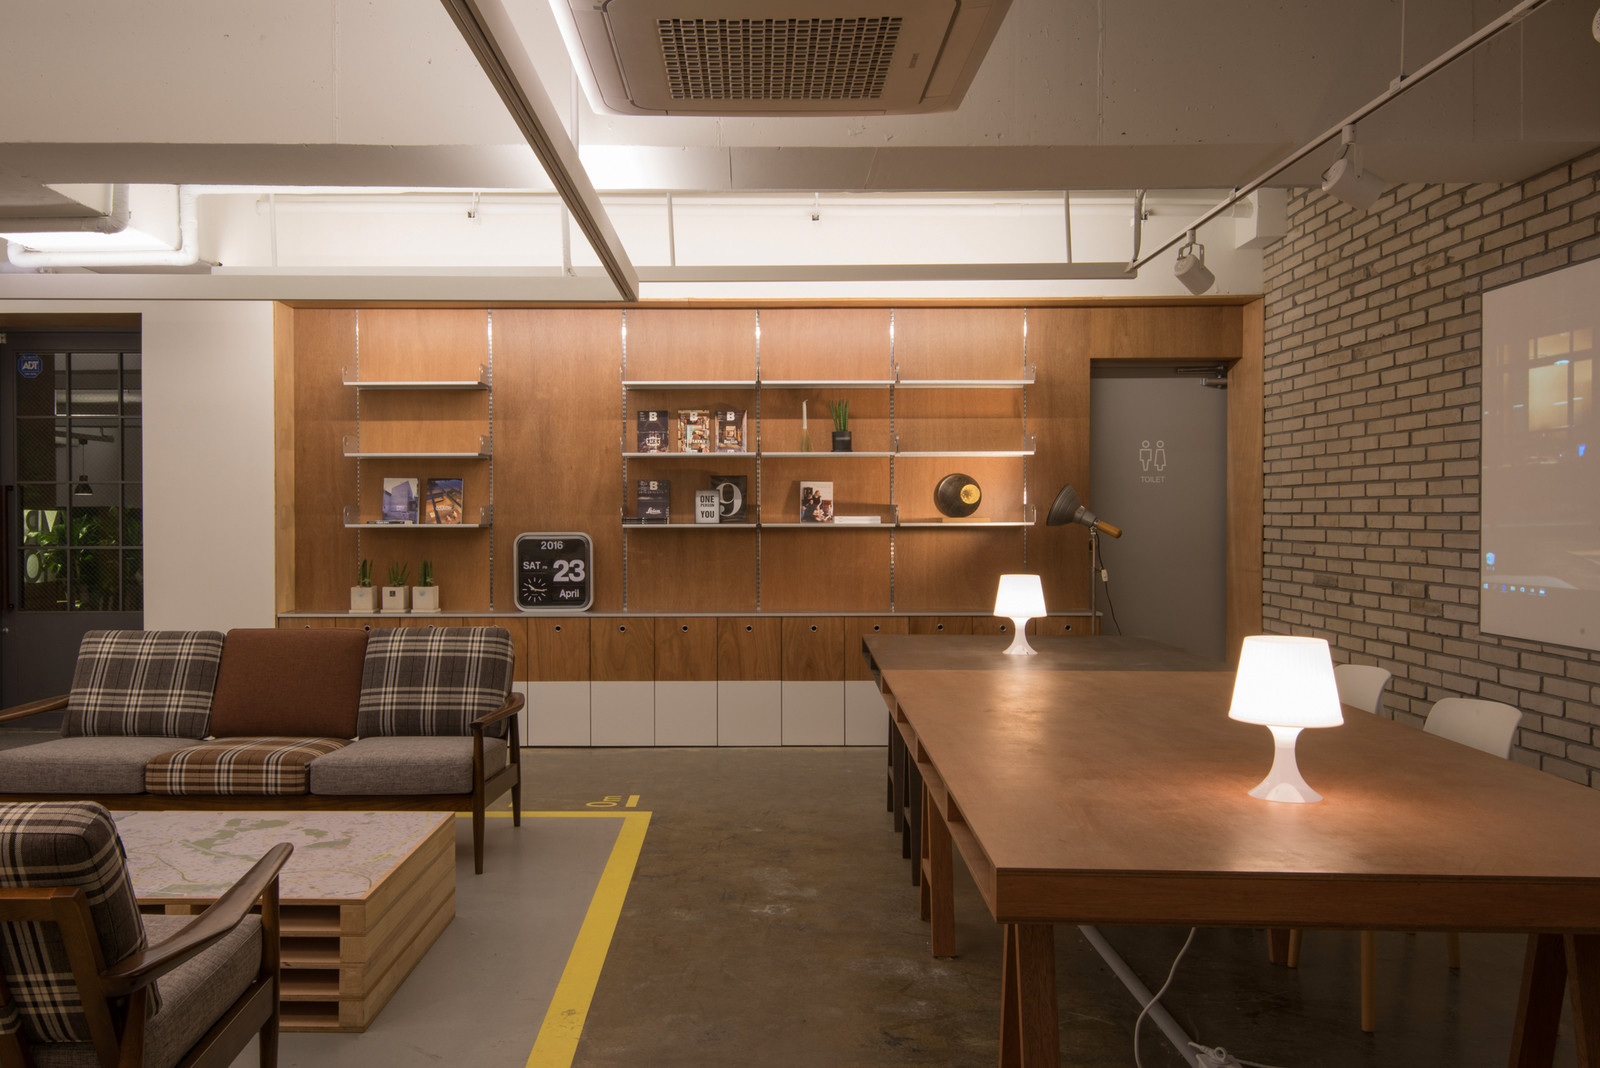 Real Estate Agency Office Homes in South Korea